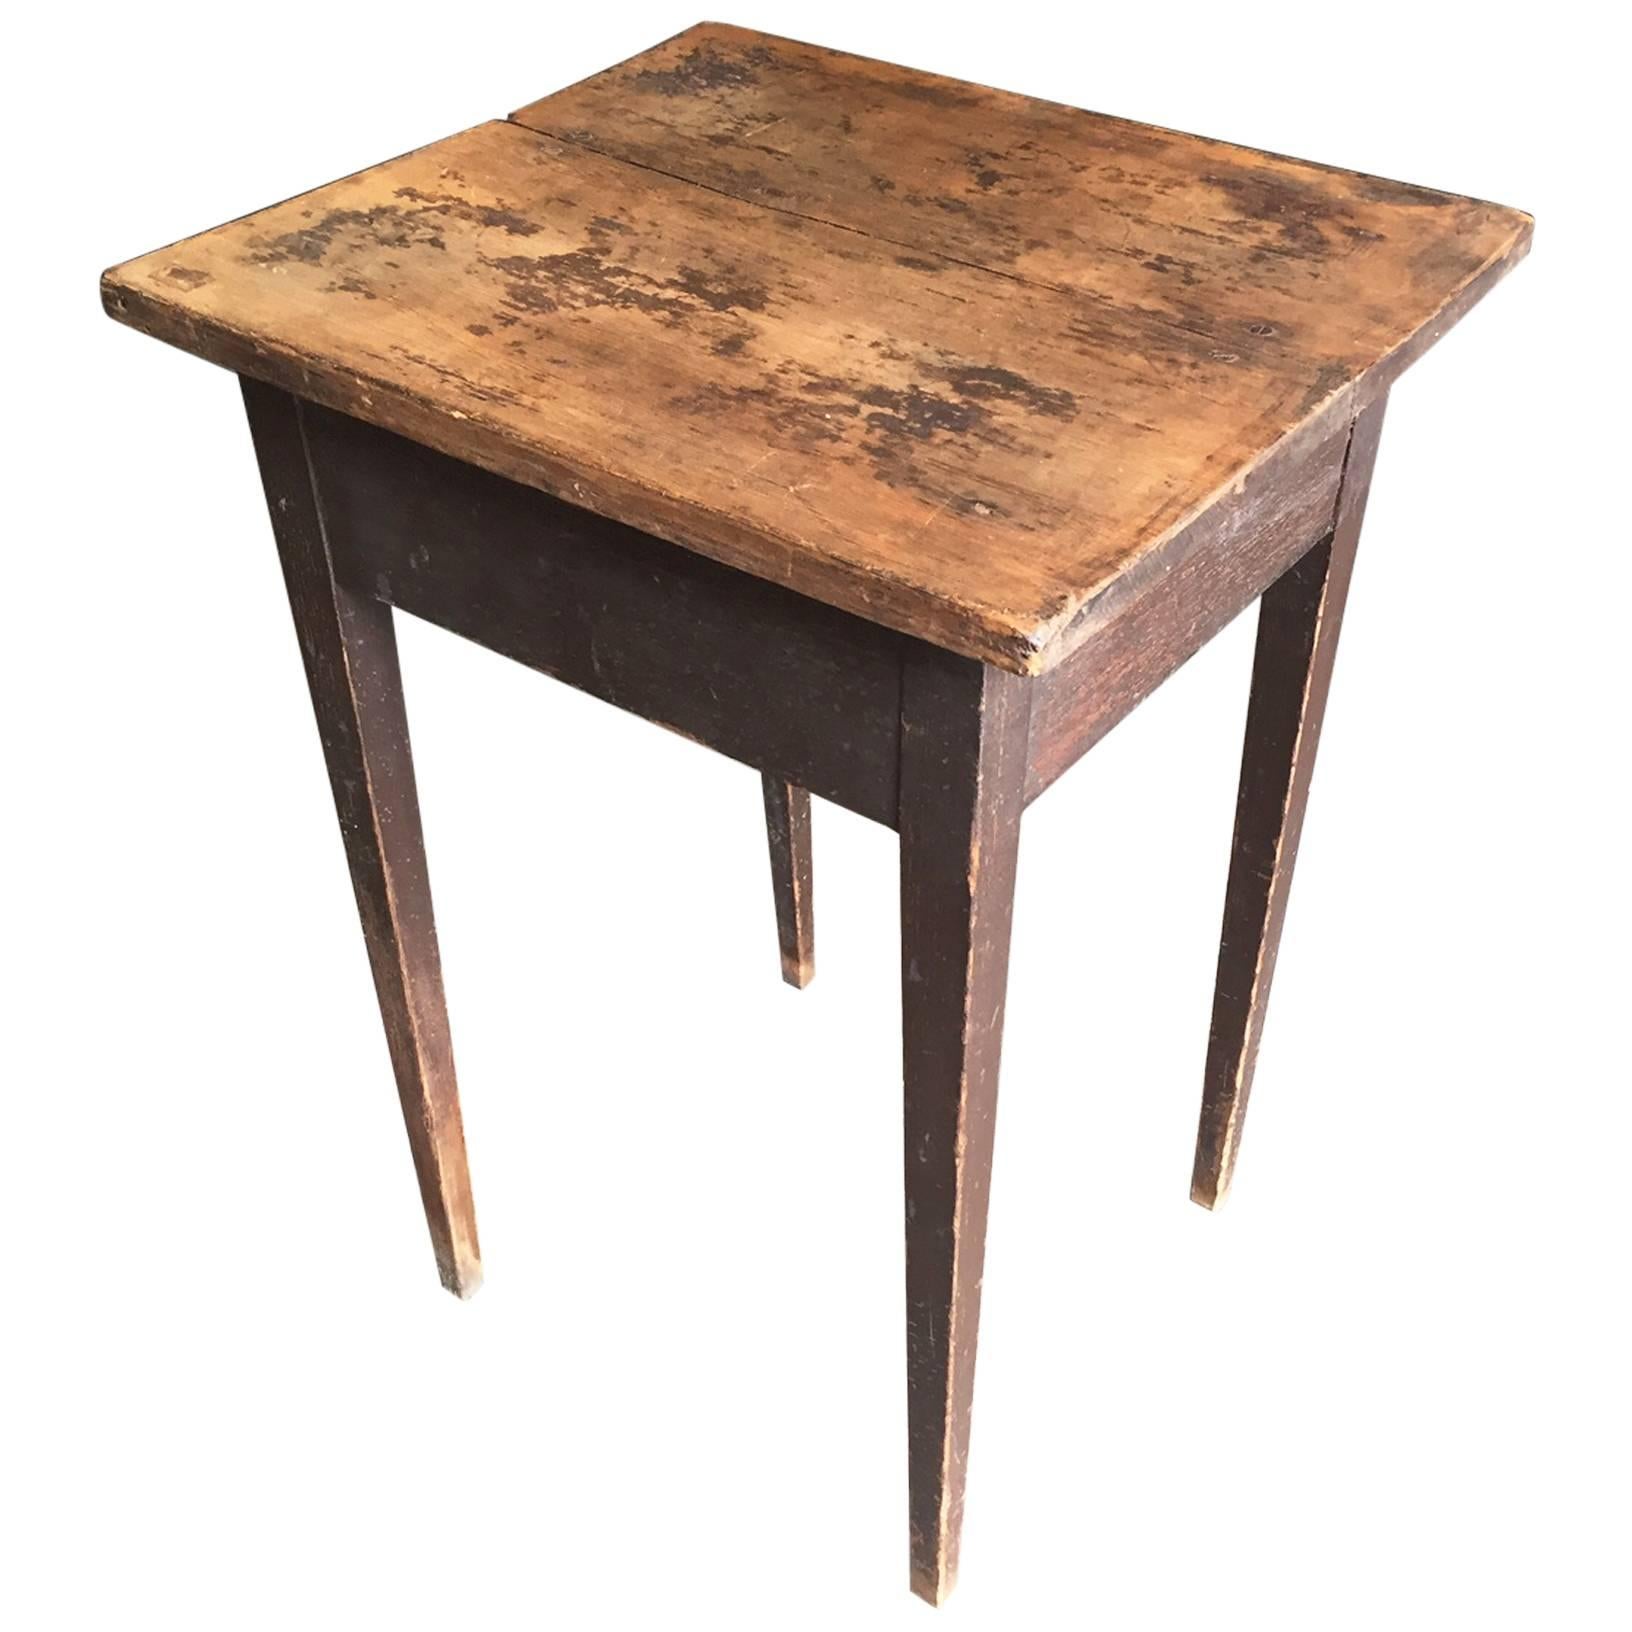 Small Painted Table, American, 19th Century im Angebot